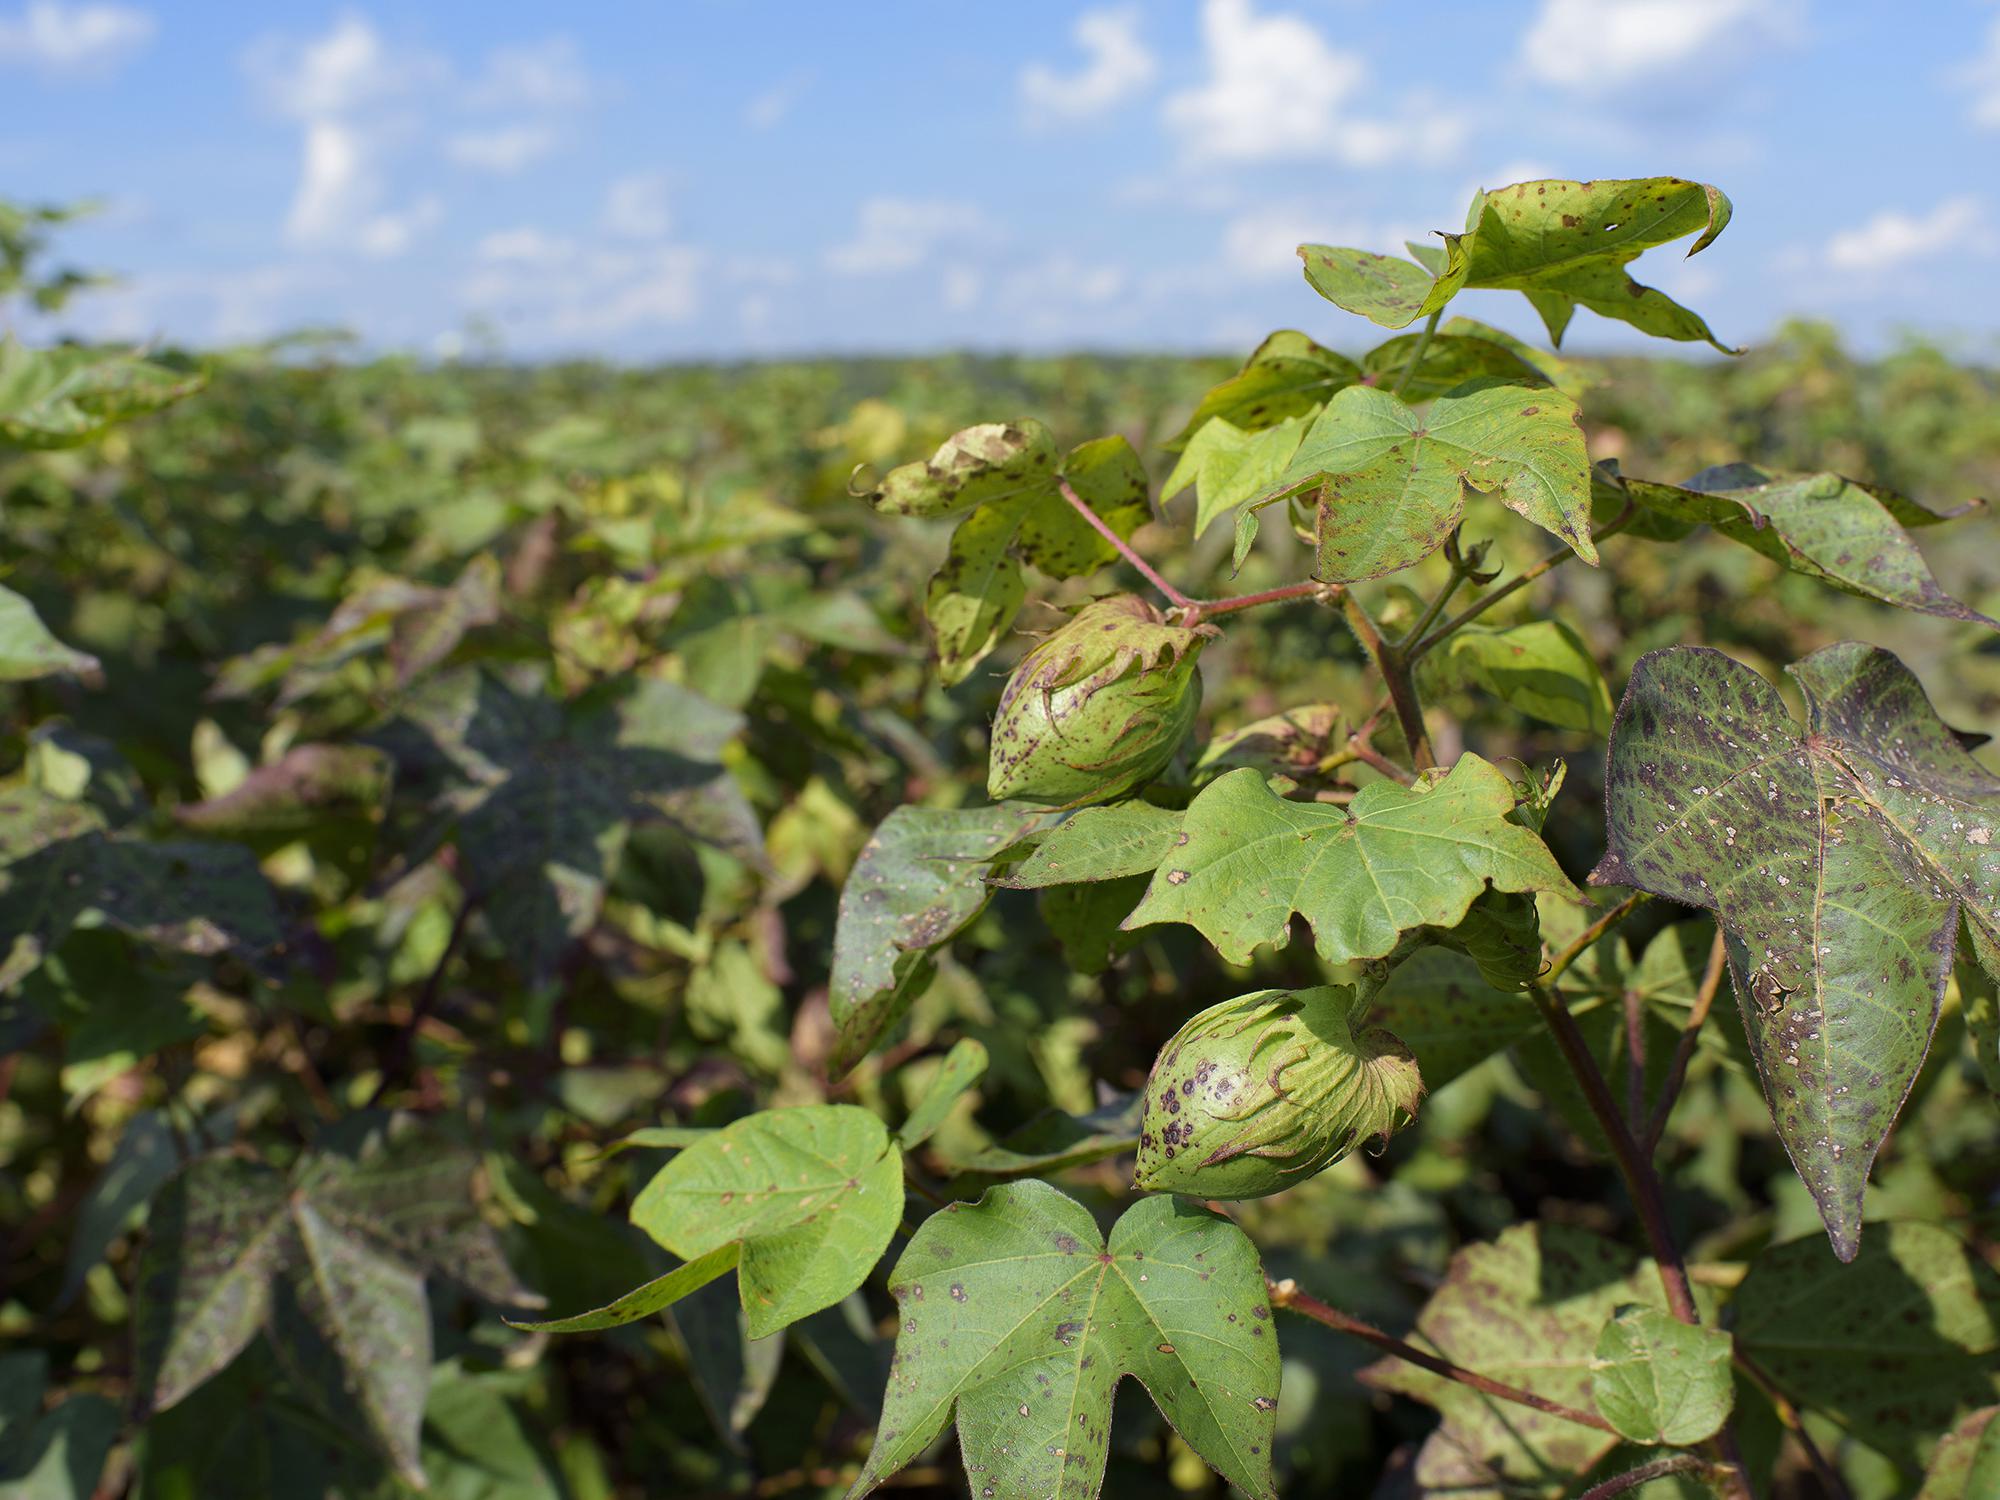 A closed boll is seen on a cotton plant growing in a field.